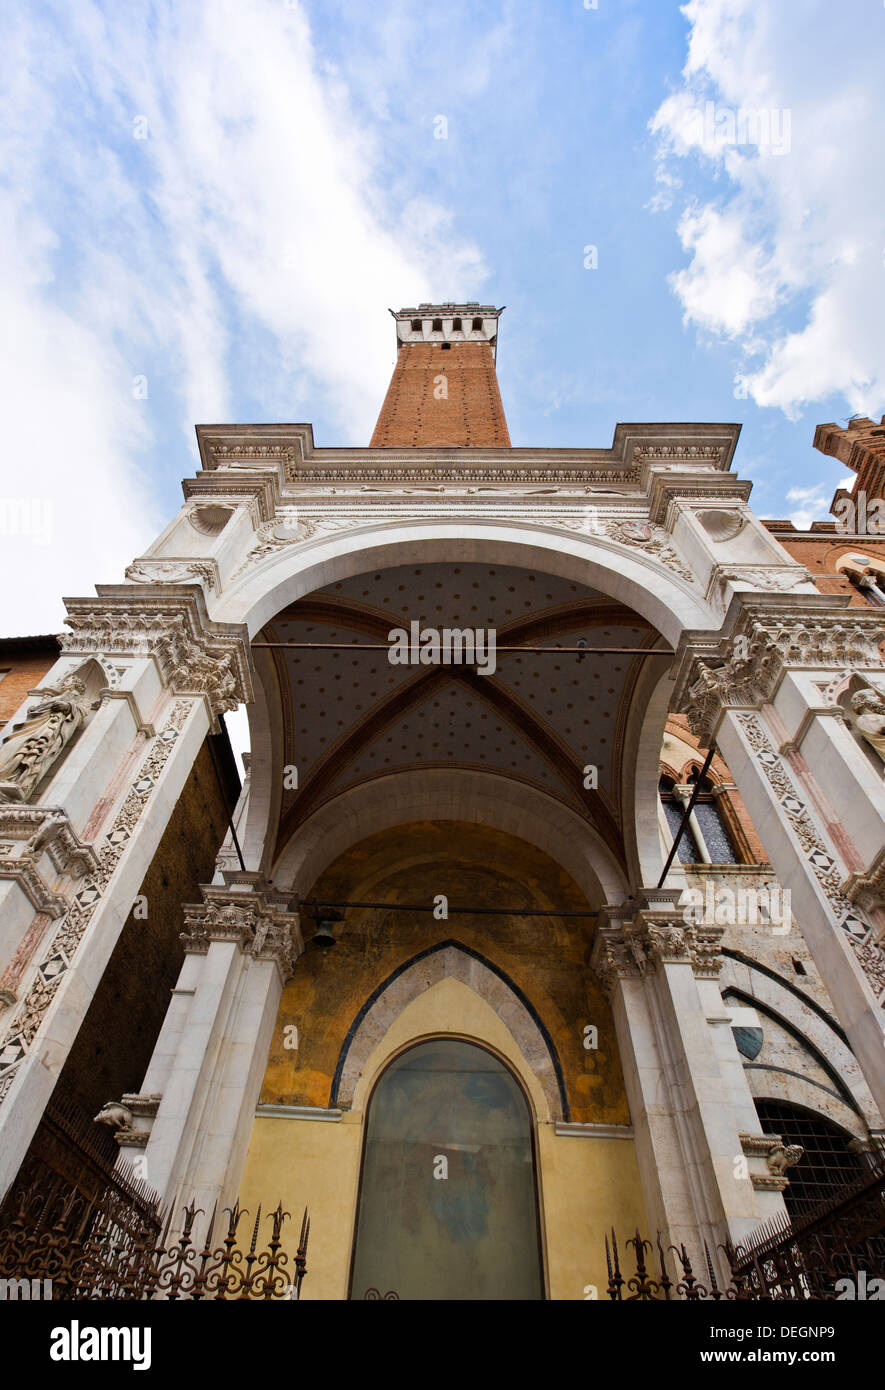 Low angle view of a Tower, Torre del Mangia et Palazzo Pubblico, Piazza del Campo, Sienne, Toscane, Italie Banque D'Images